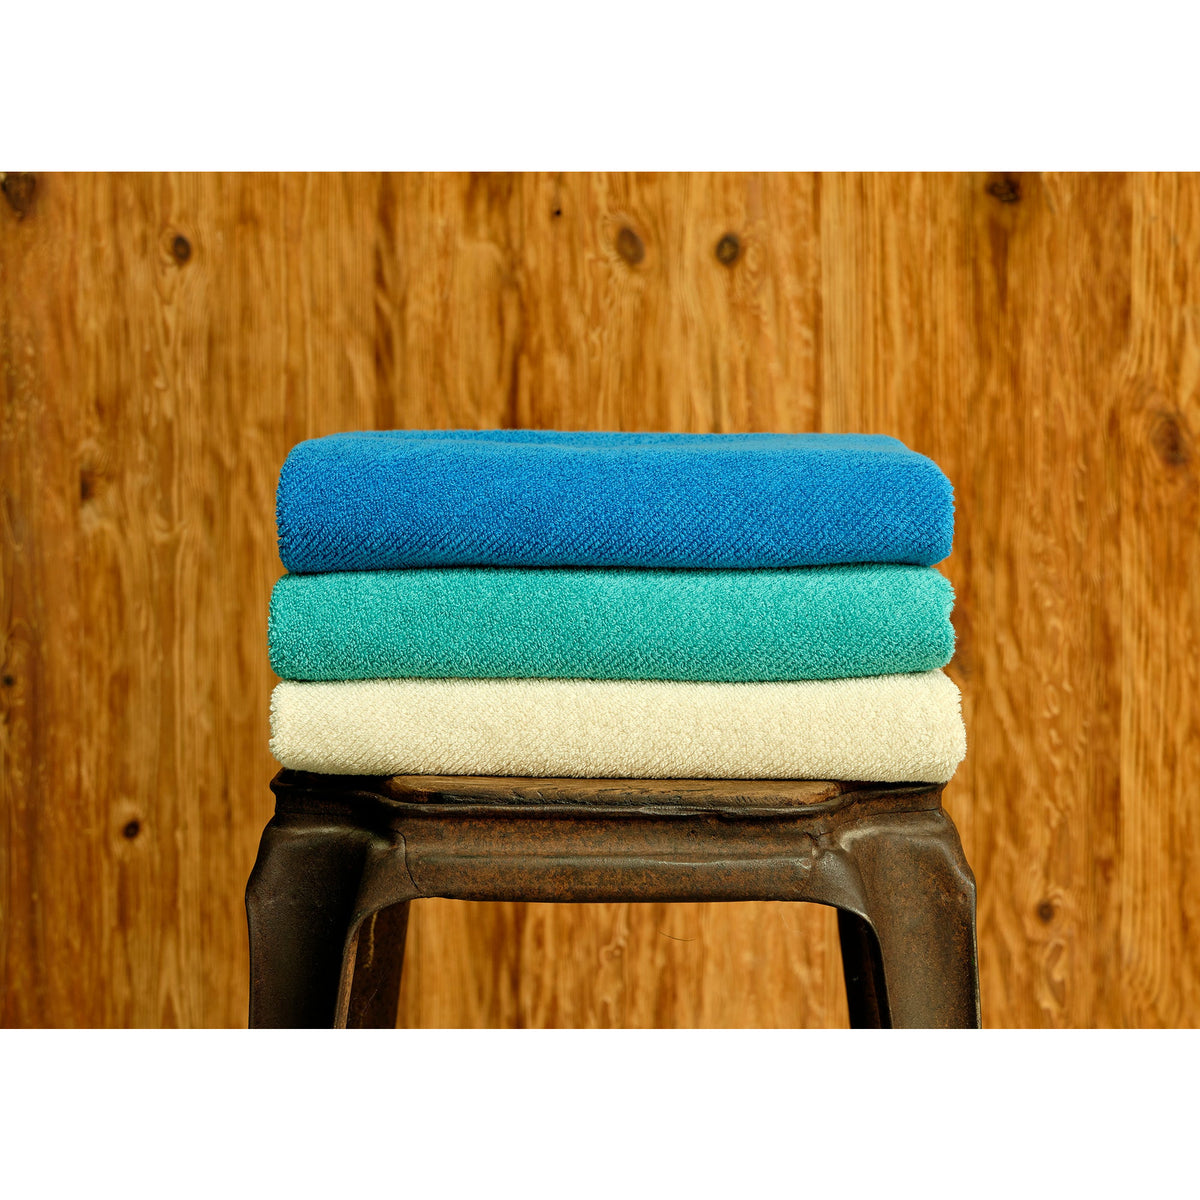 Abyss Twill Bath Towels Stack On Stool Ivory Fine Linens